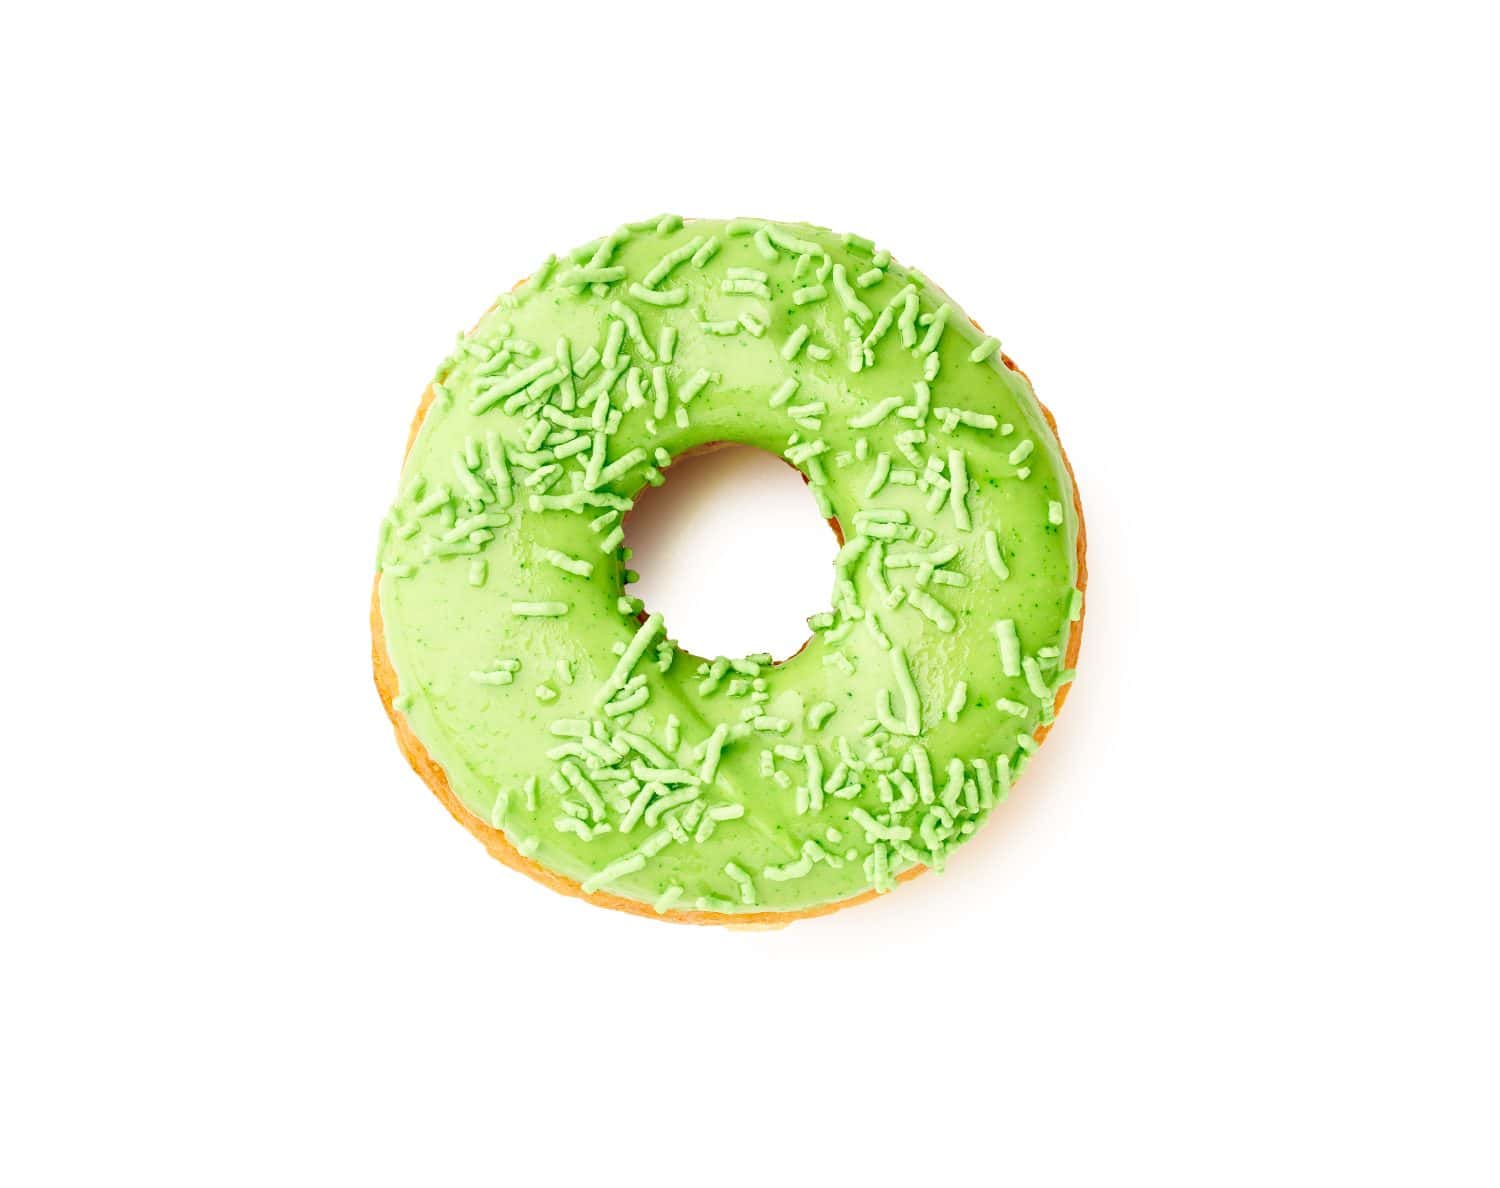 Glazed sweet green apple donut isolated on white background with copy space.